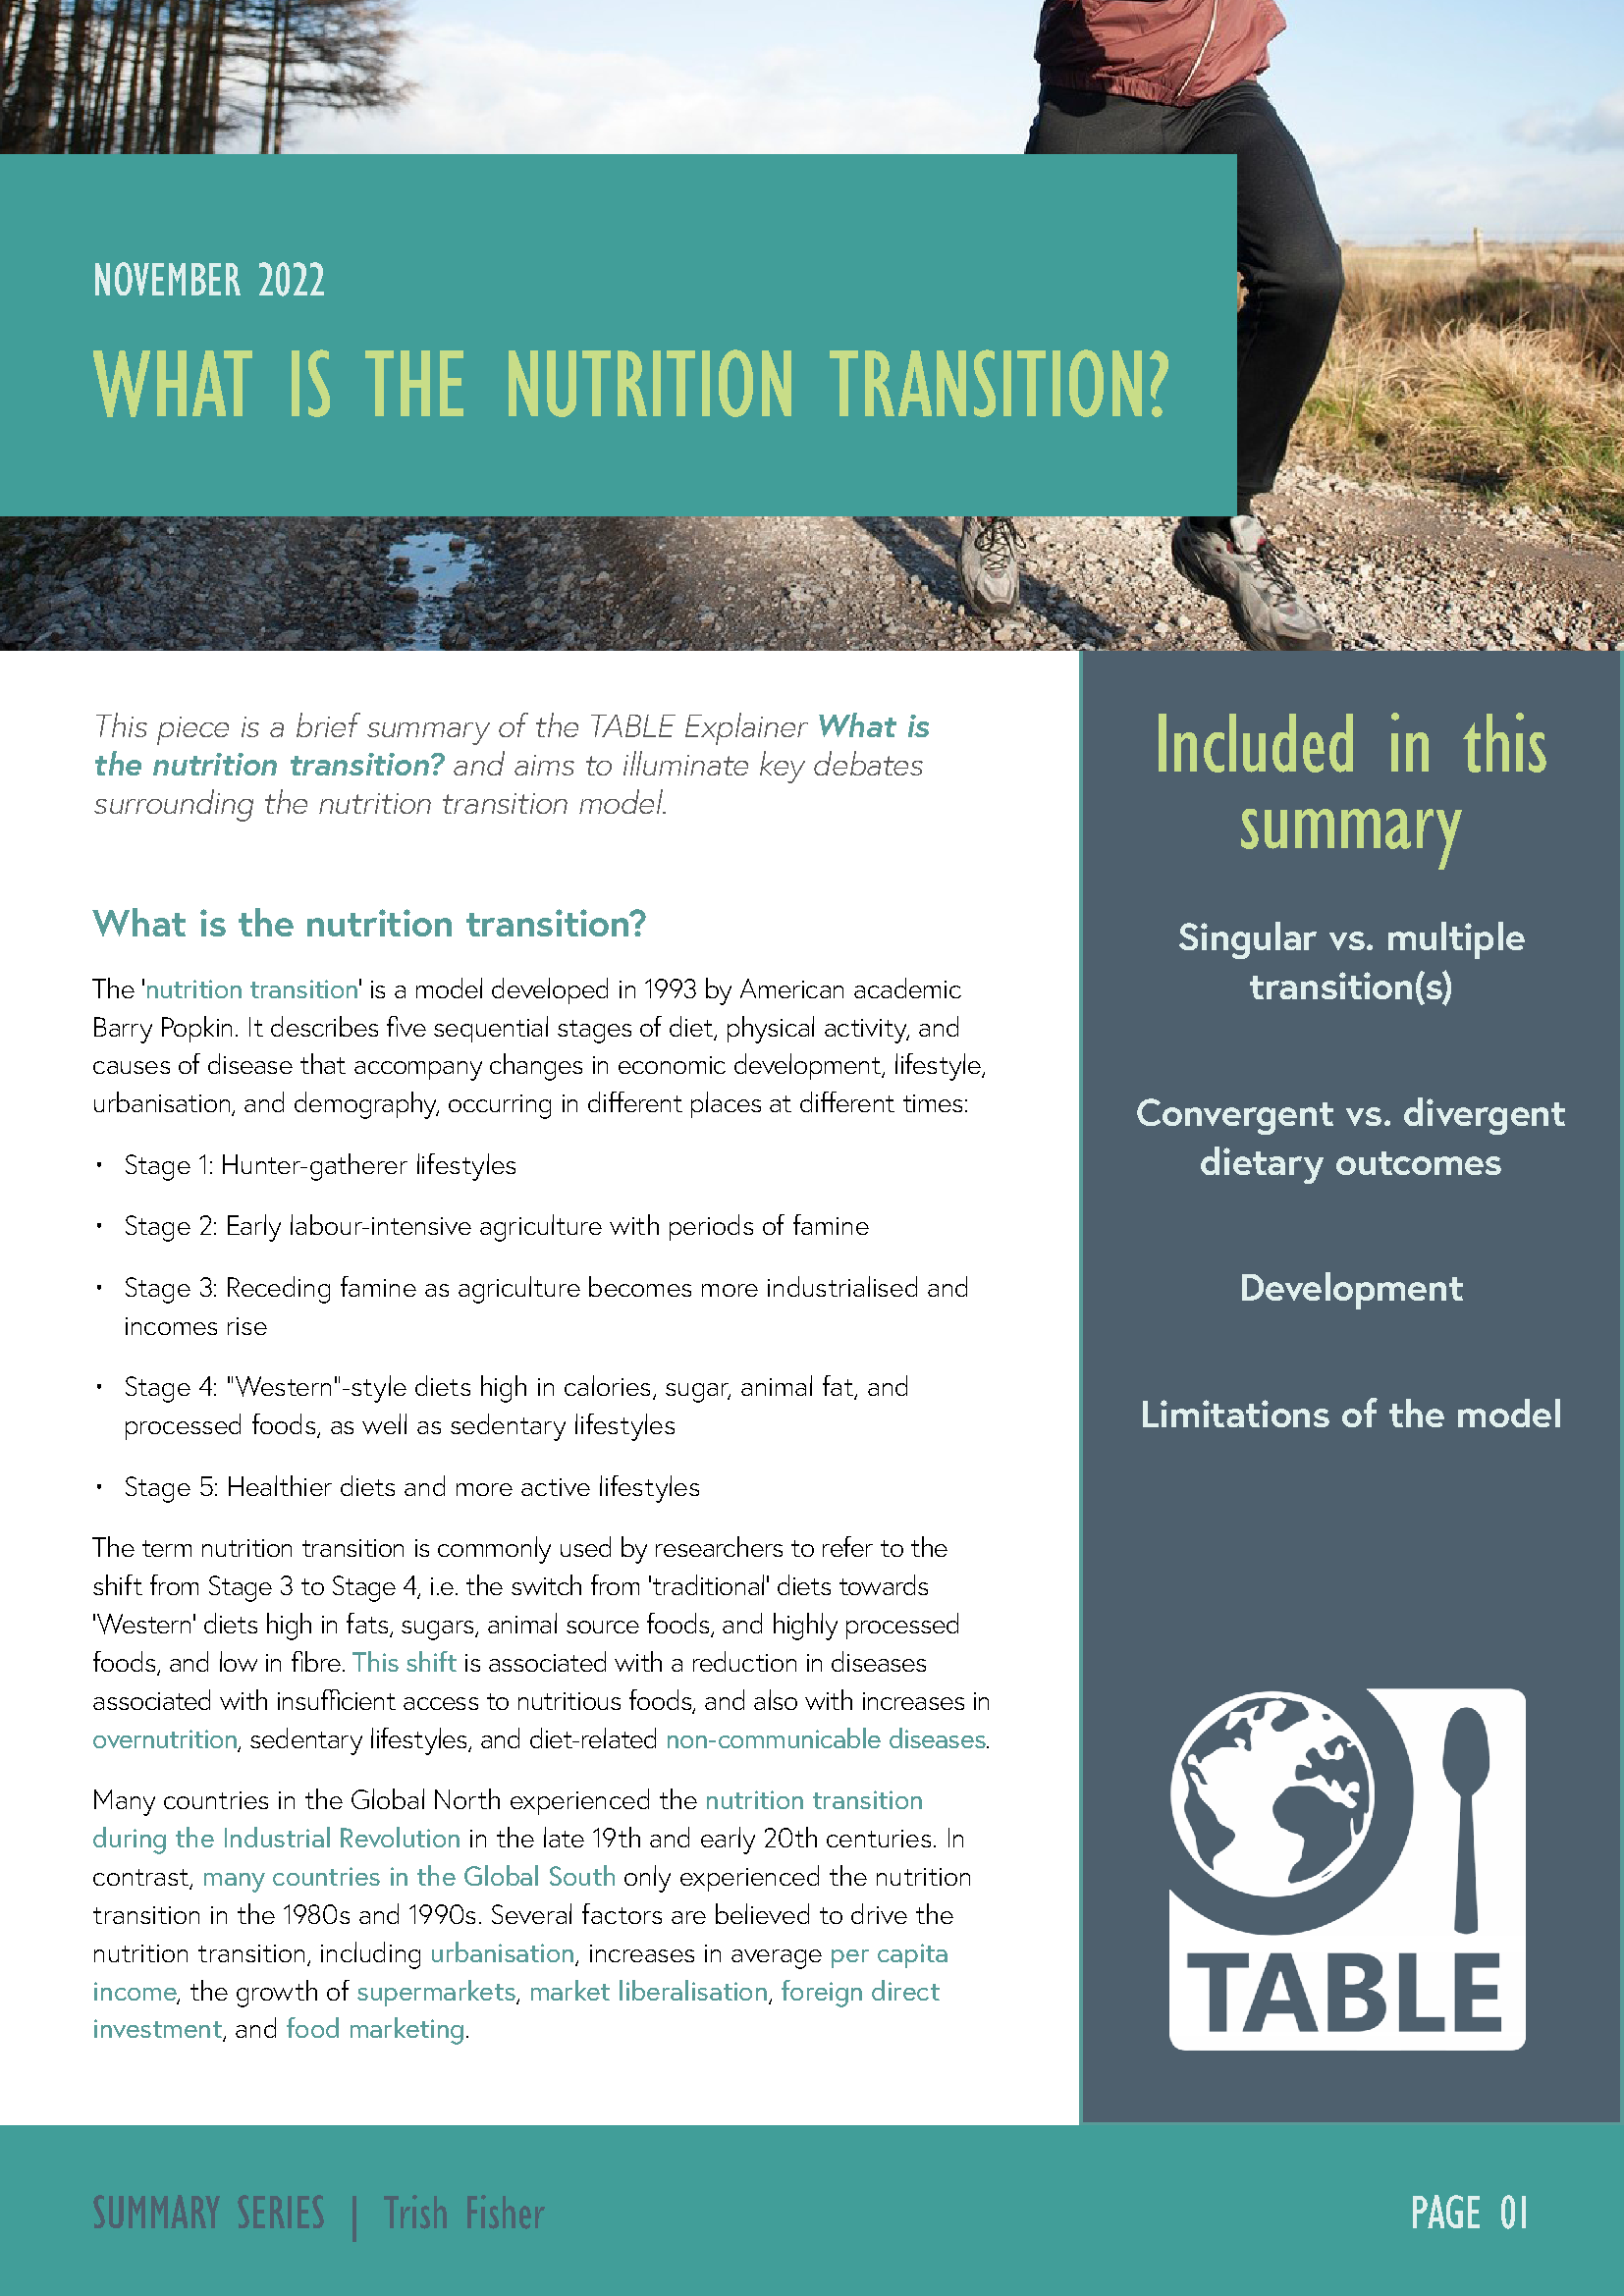 Page 1 of the Nutrition Transition Summary